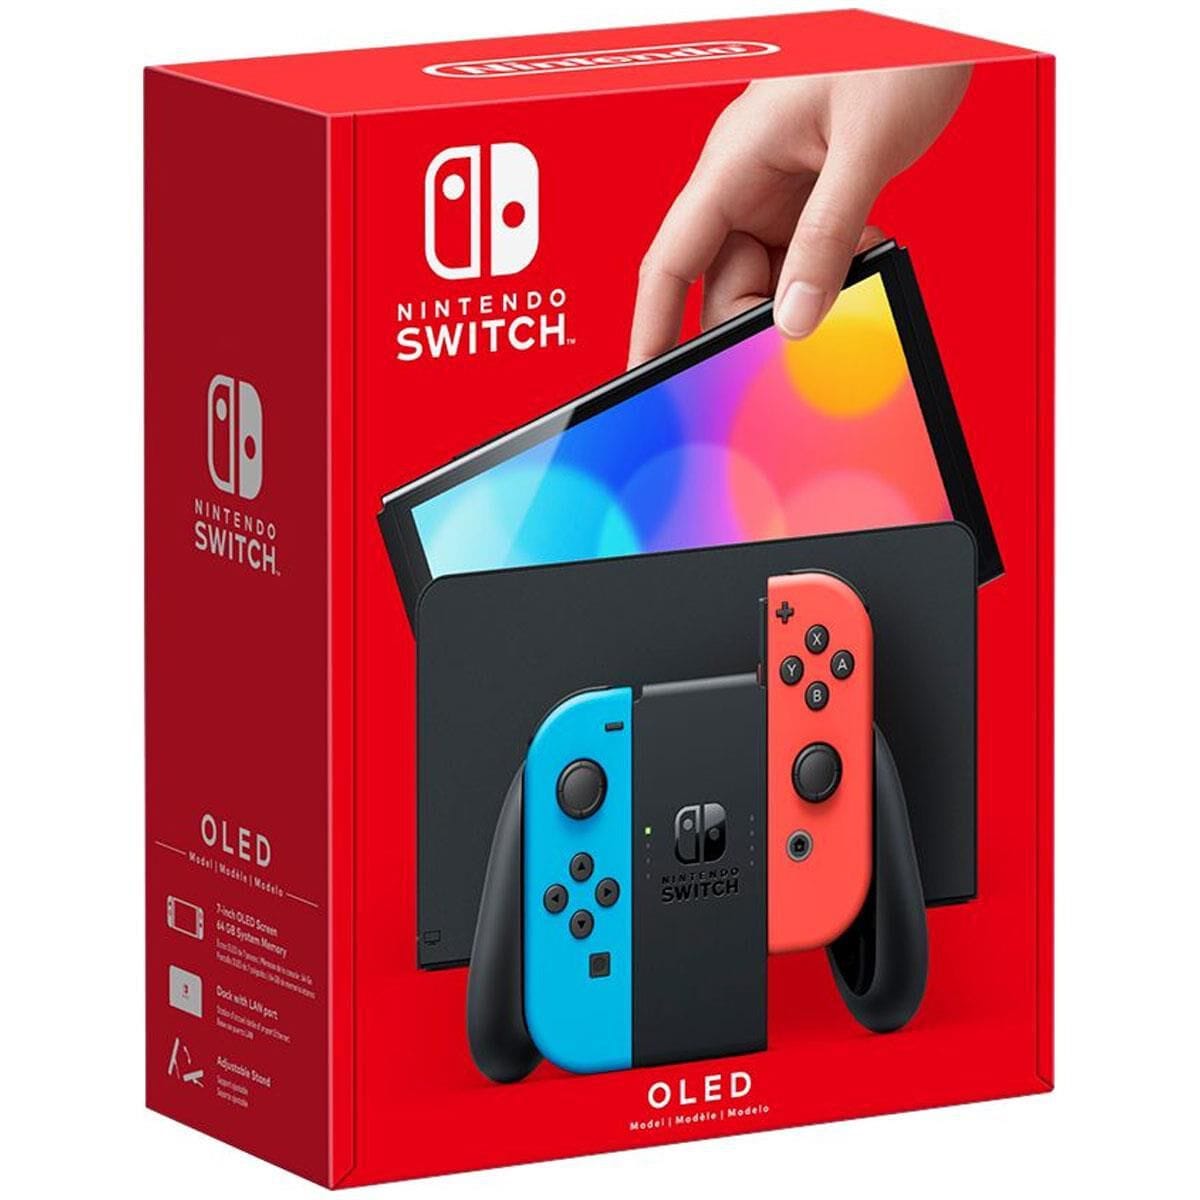 Nintendo Switch (OLED) with Neon Red & Blue Joy-Con | NFM